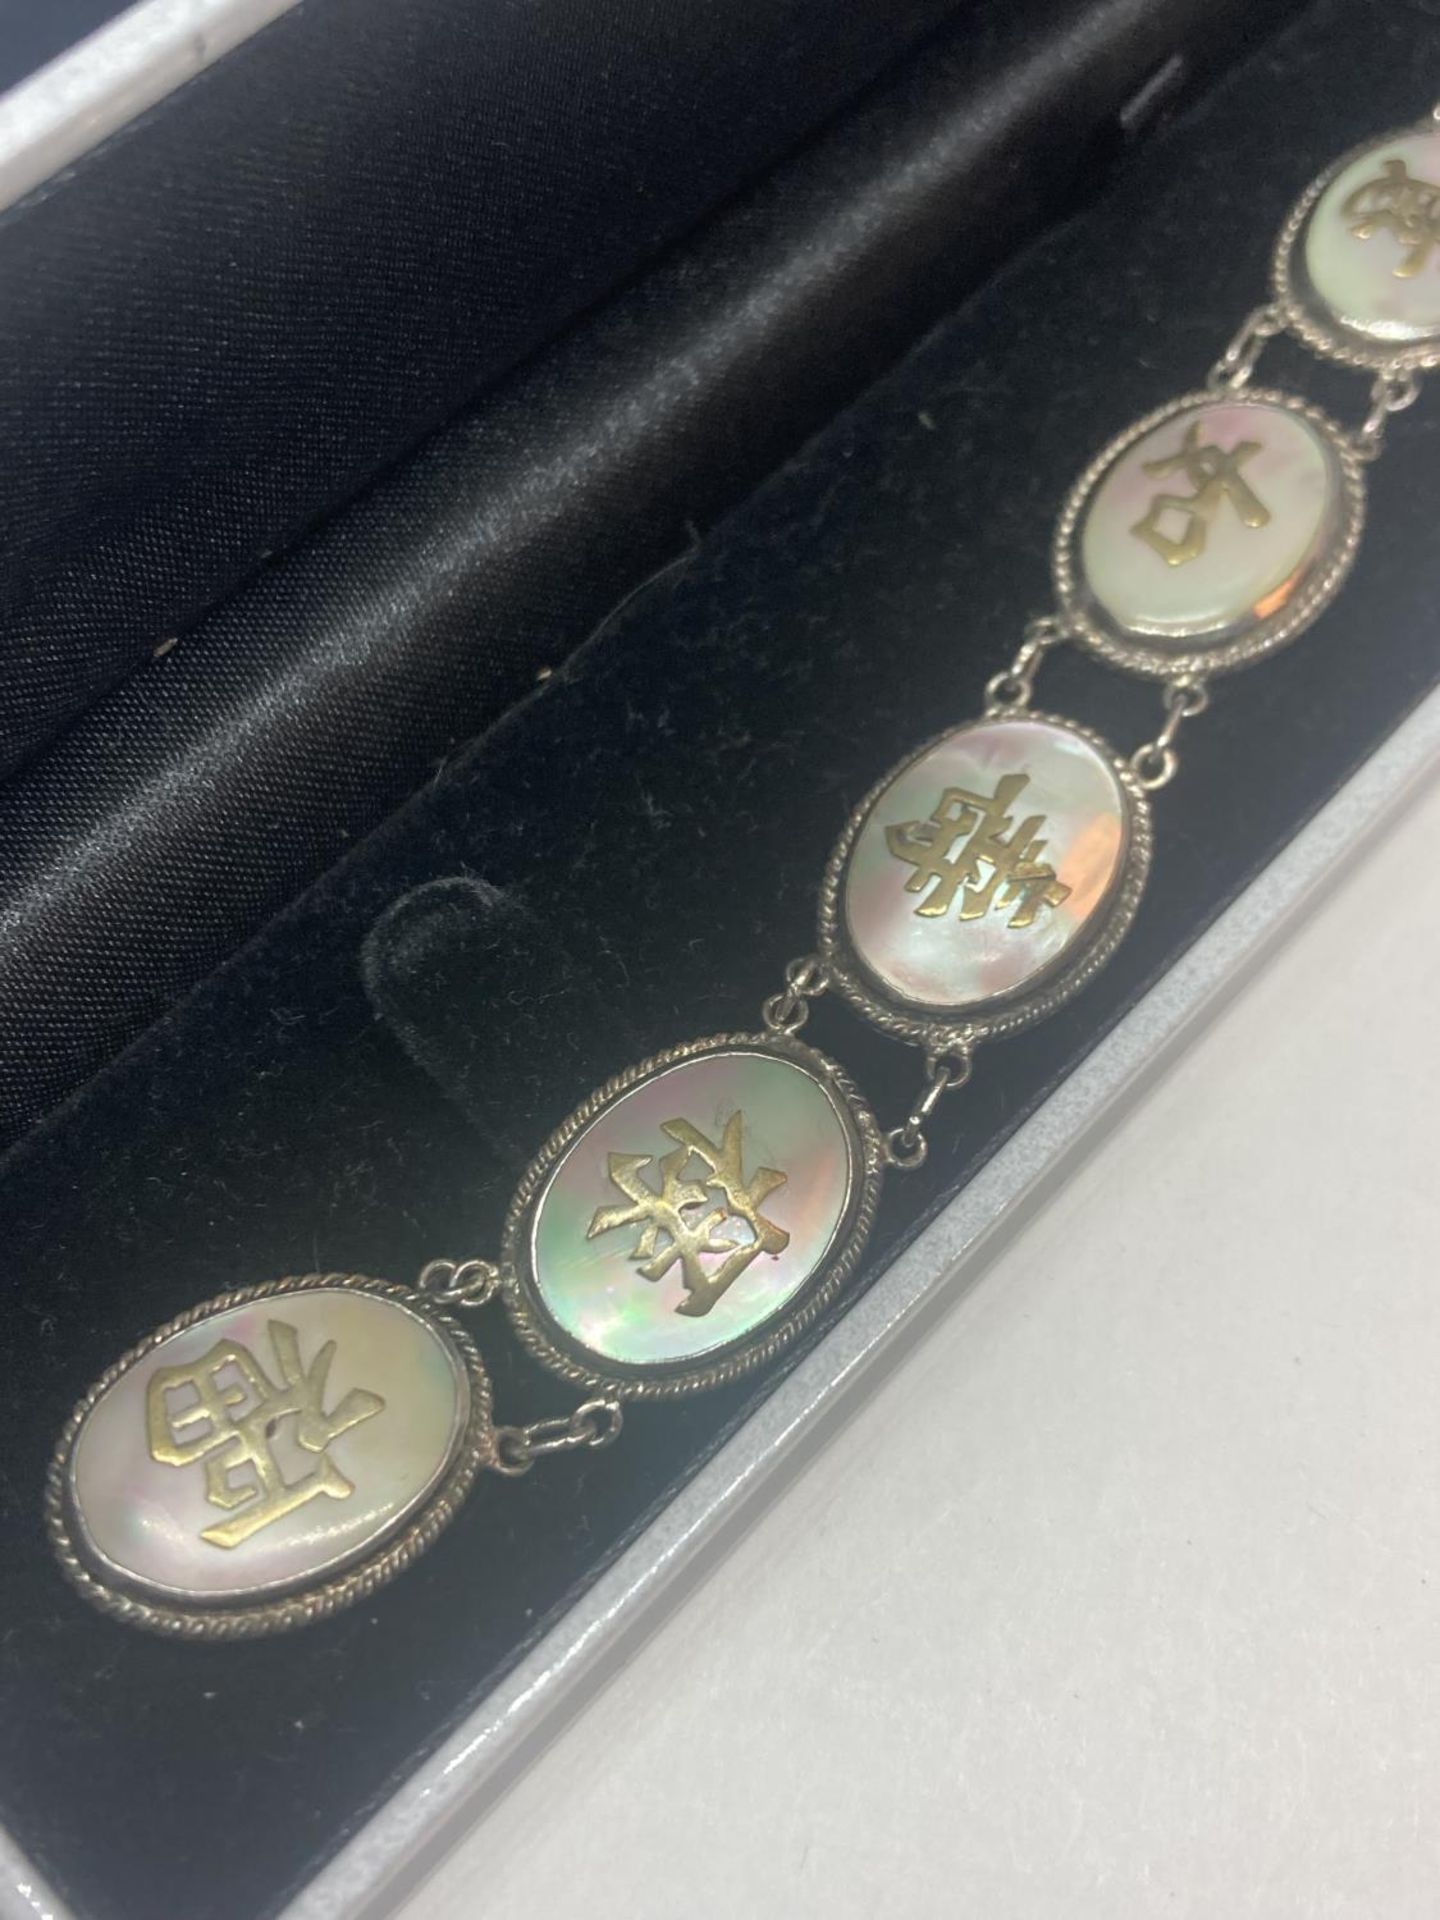 AN ORIENTAL SILVER AND MOTHER OF PEARL CHARACTER LINK BRACELET IN A PRESENTATION BOX - Image 3 of 10